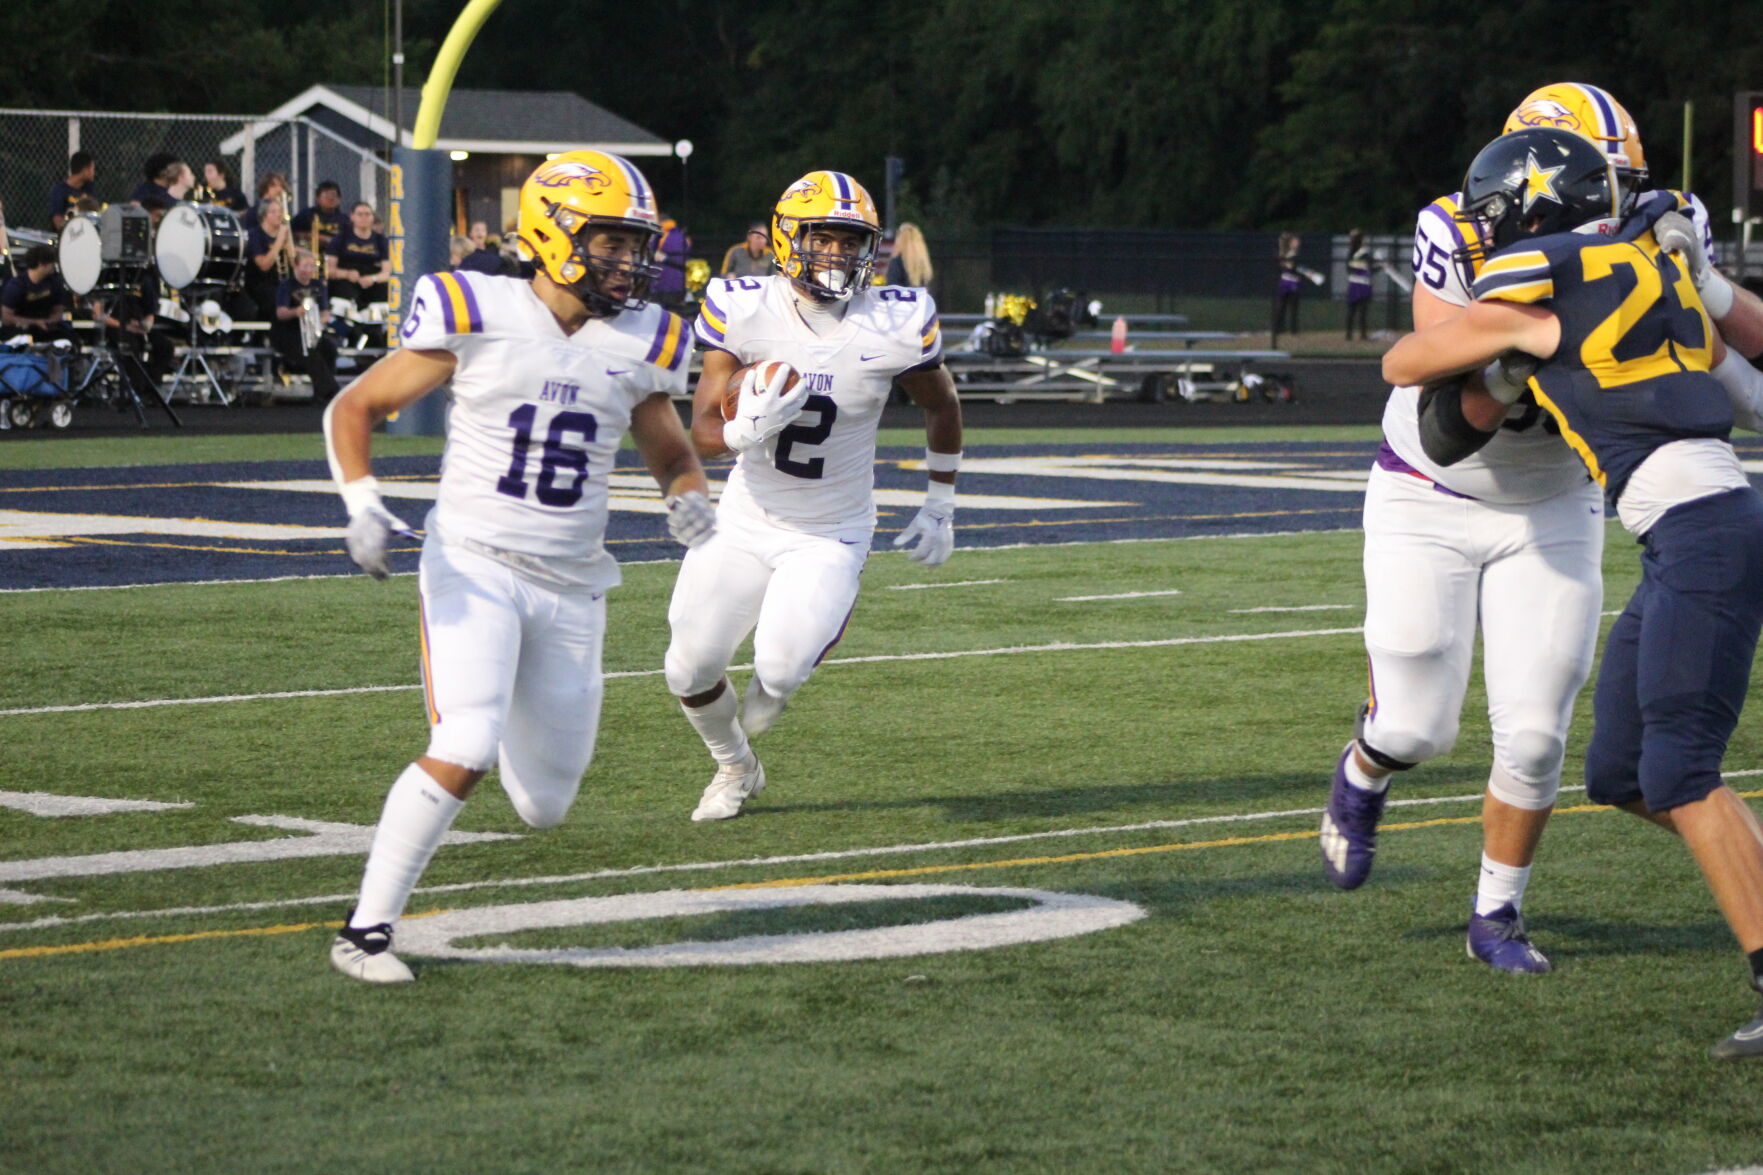 Avon Eagles dominate North Ridgeville Rangers with a 38-7 victory in the Southwestern Conference